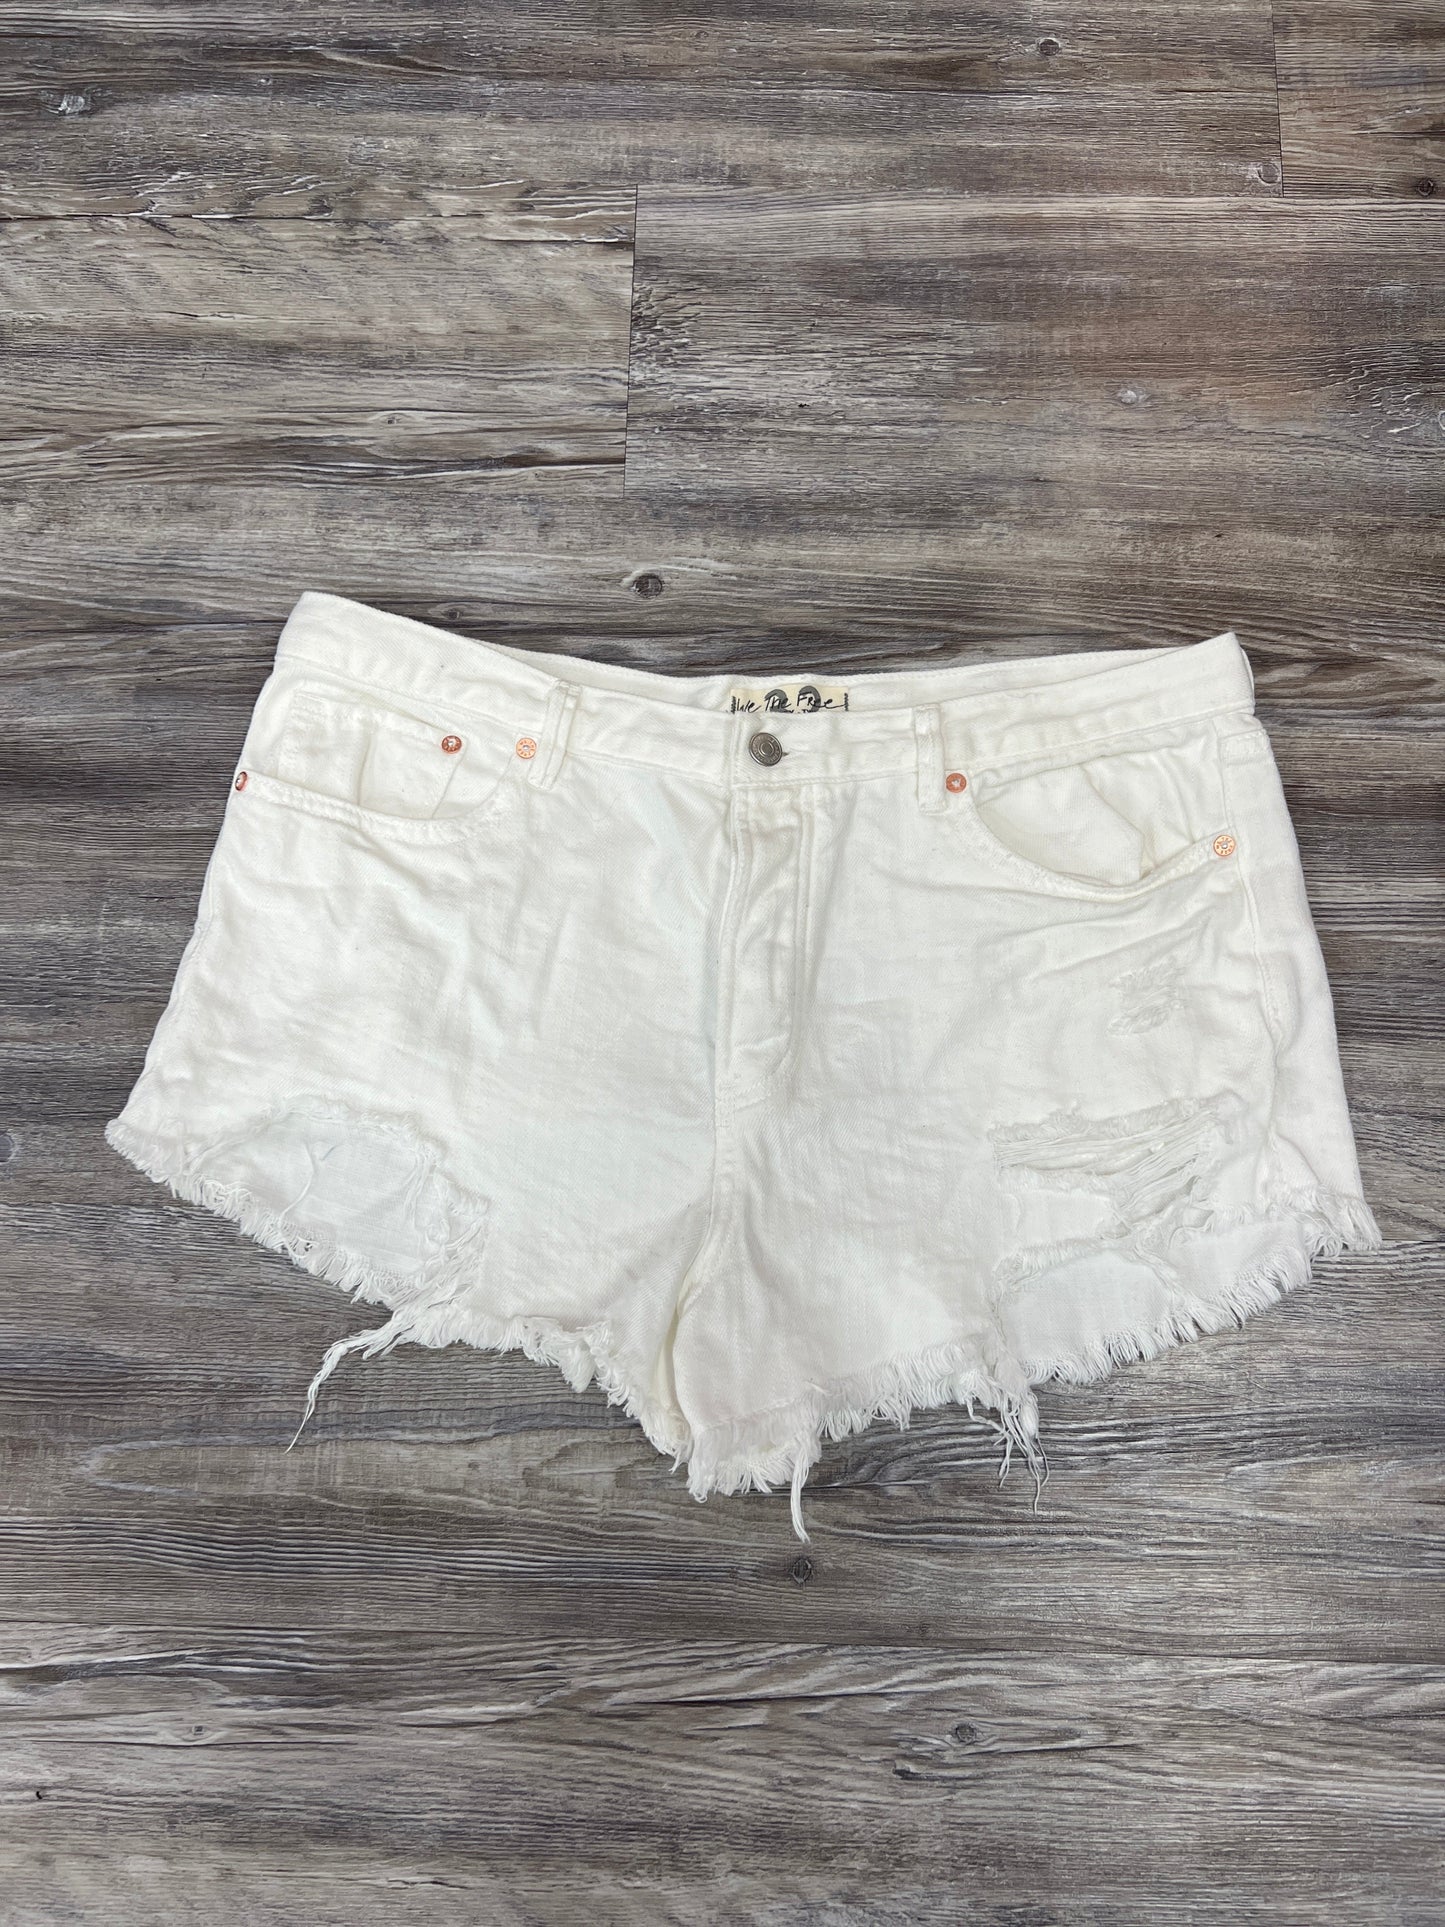 Shorts By We The Free  Size: 14